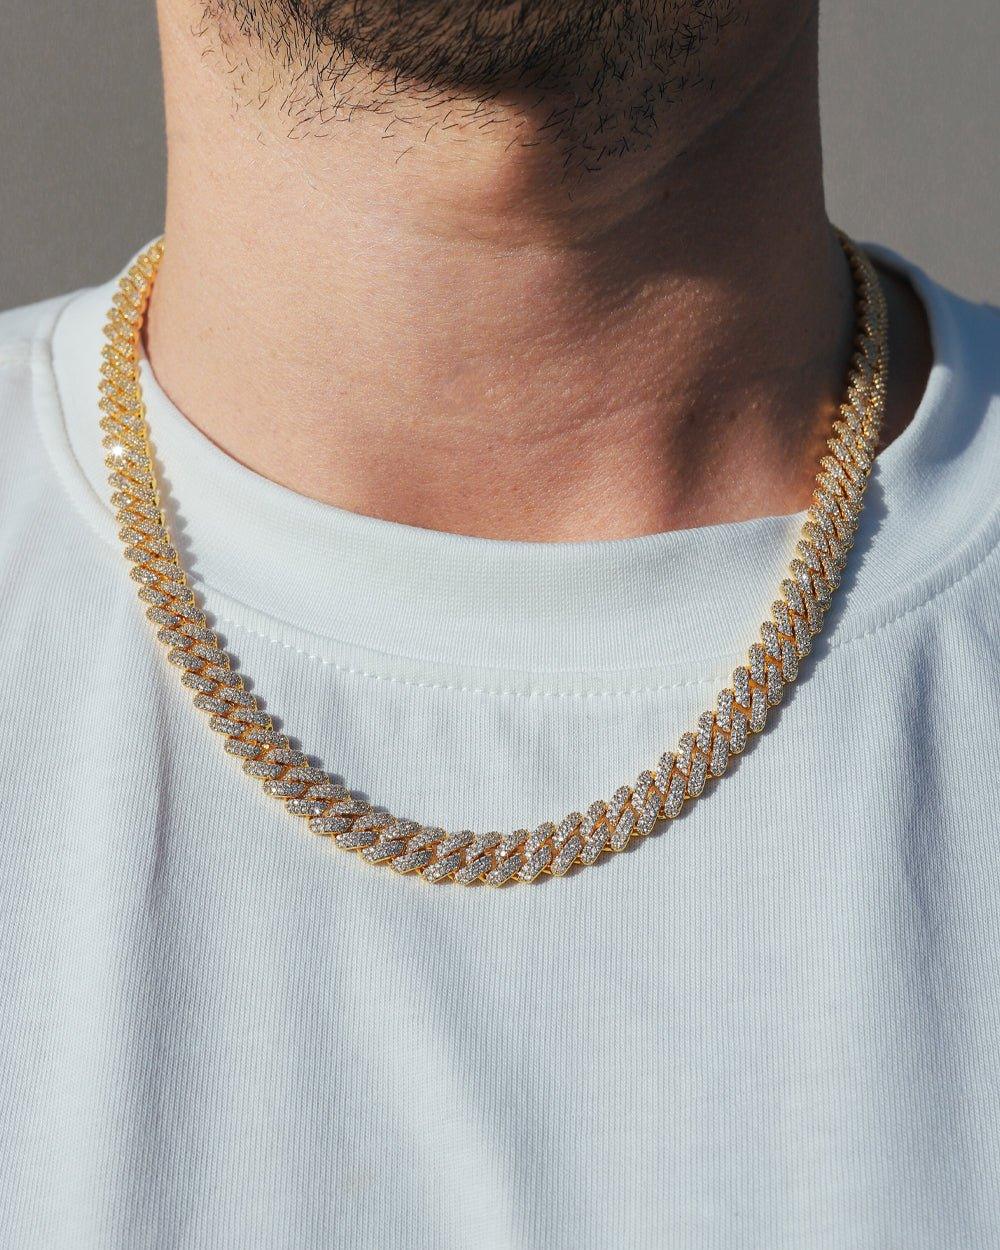 PRONG CHAIN. - 9MM 18K GOLD - DRIP IN THE JEWEL